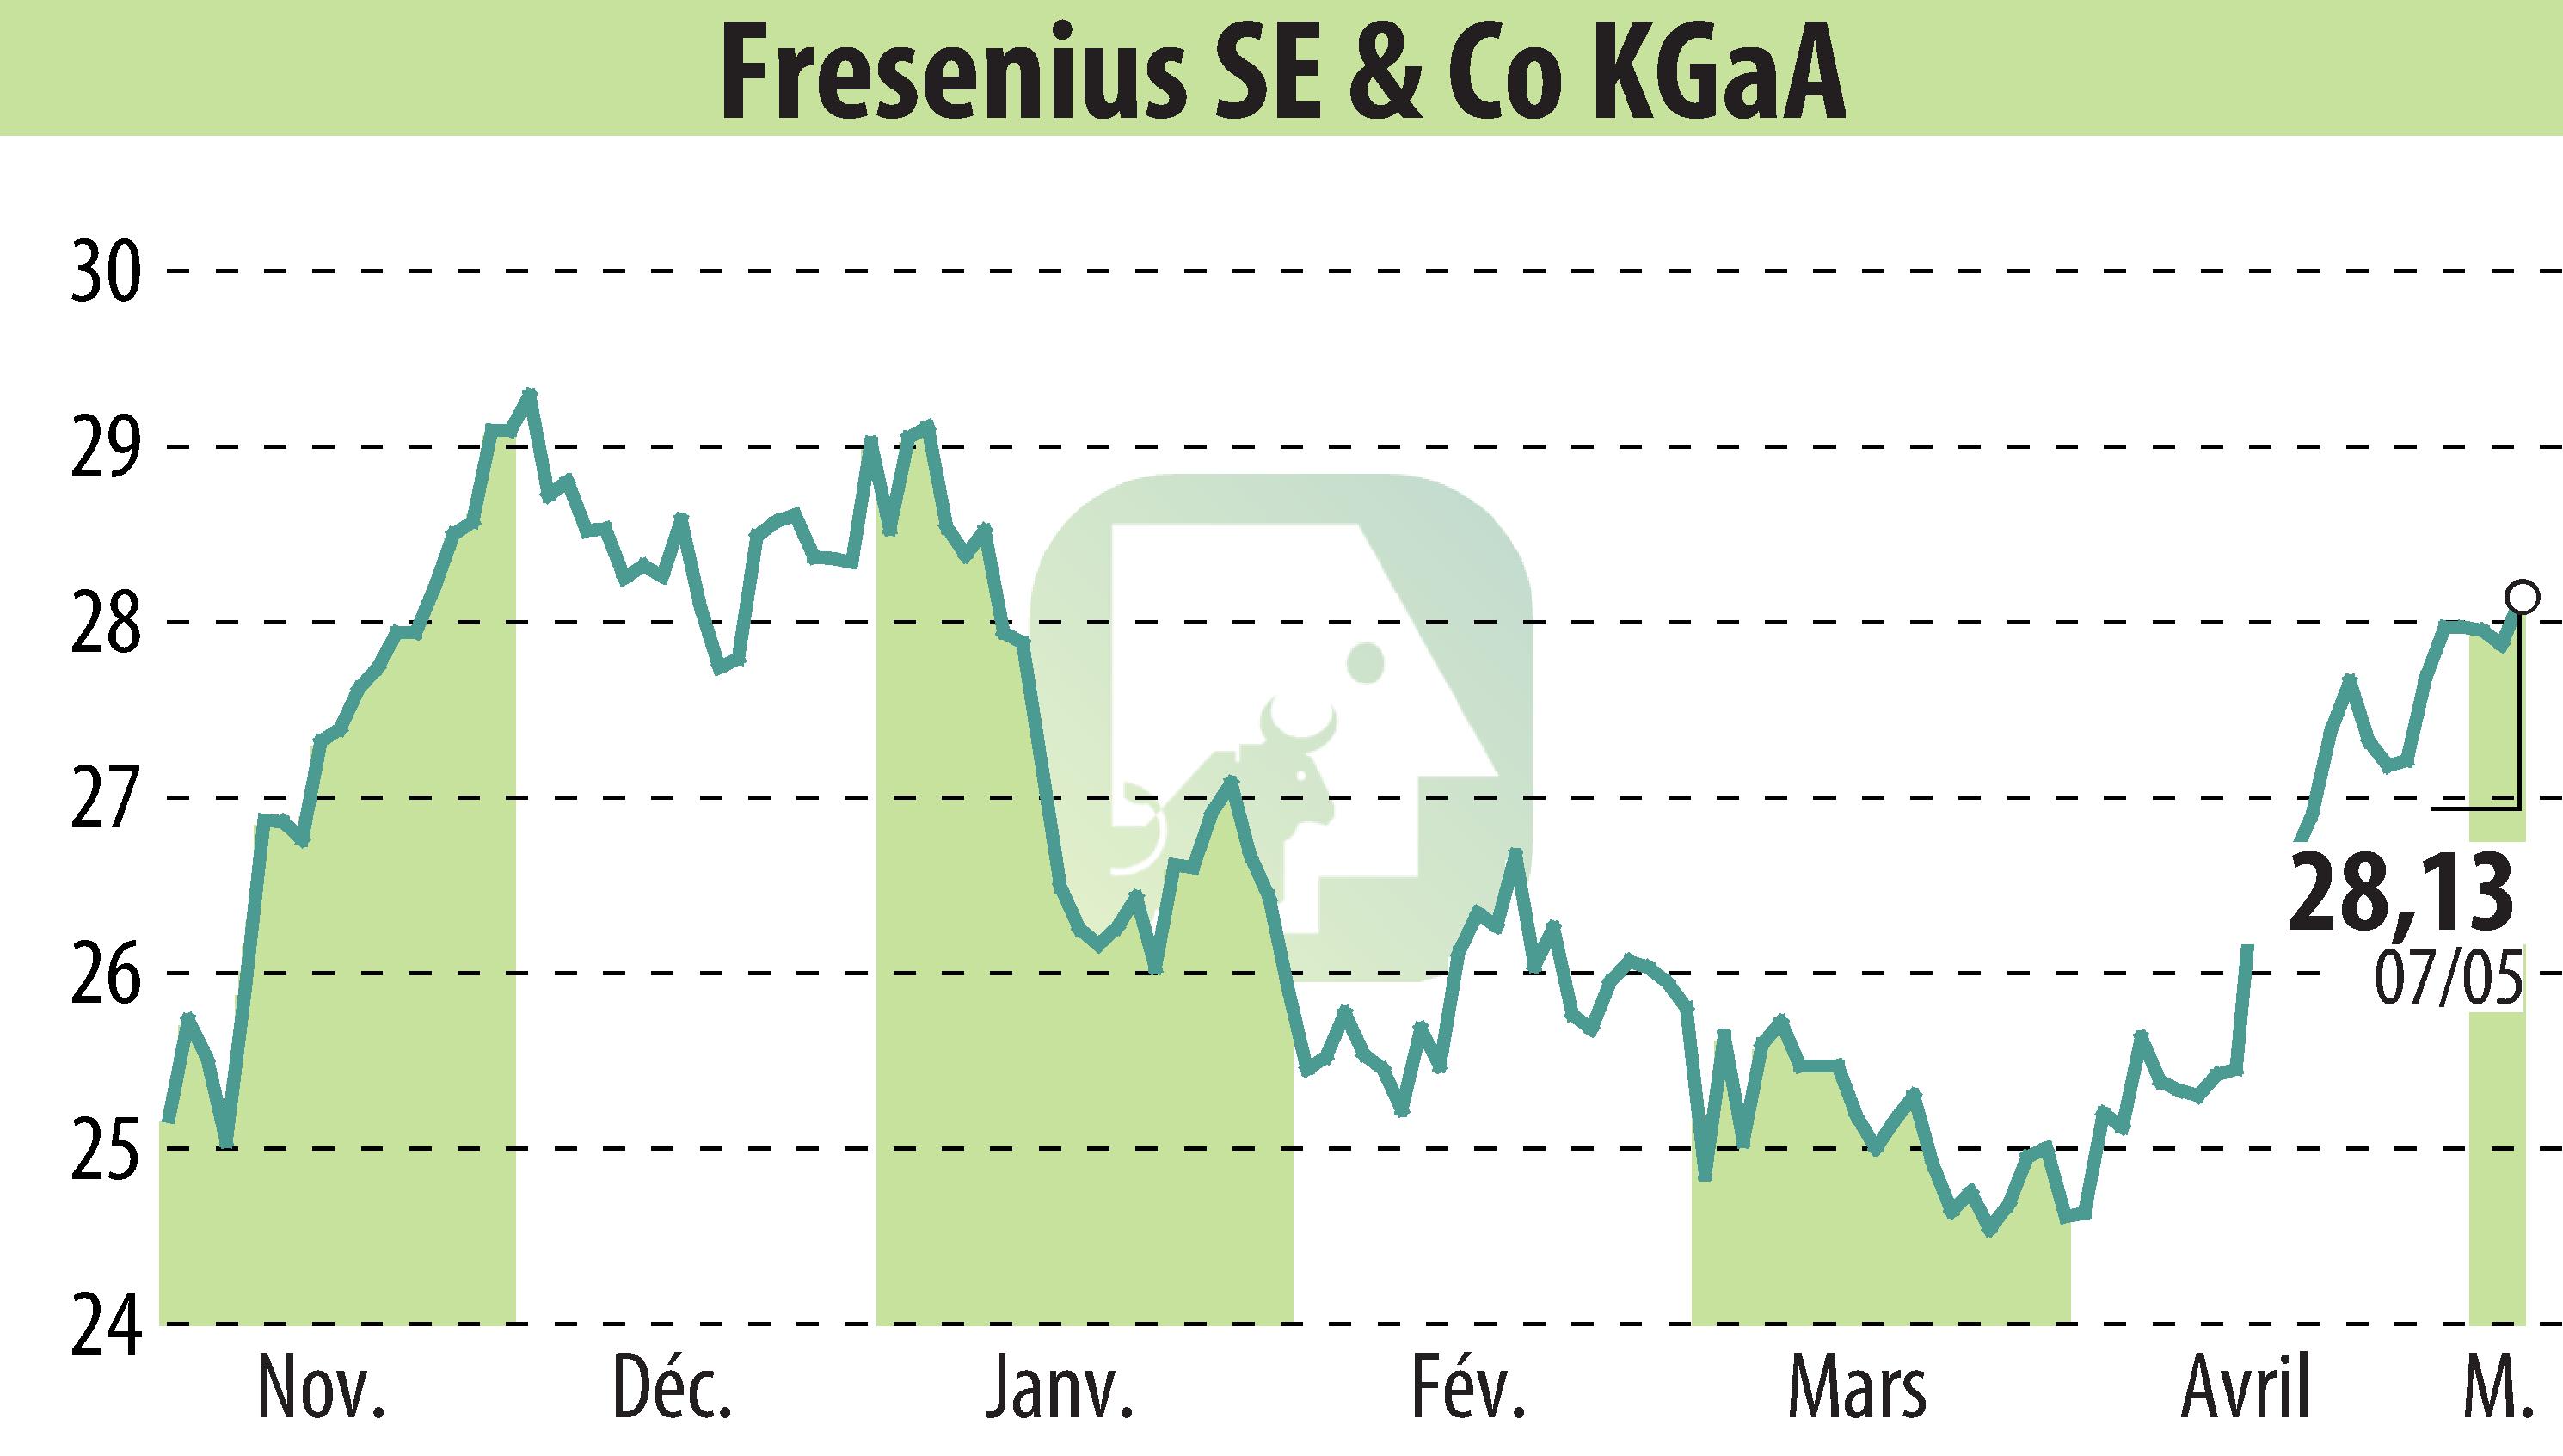 Stock price chart of Fresenius SE & Co. KGaA (EBR:FRE) showing fluctuations.